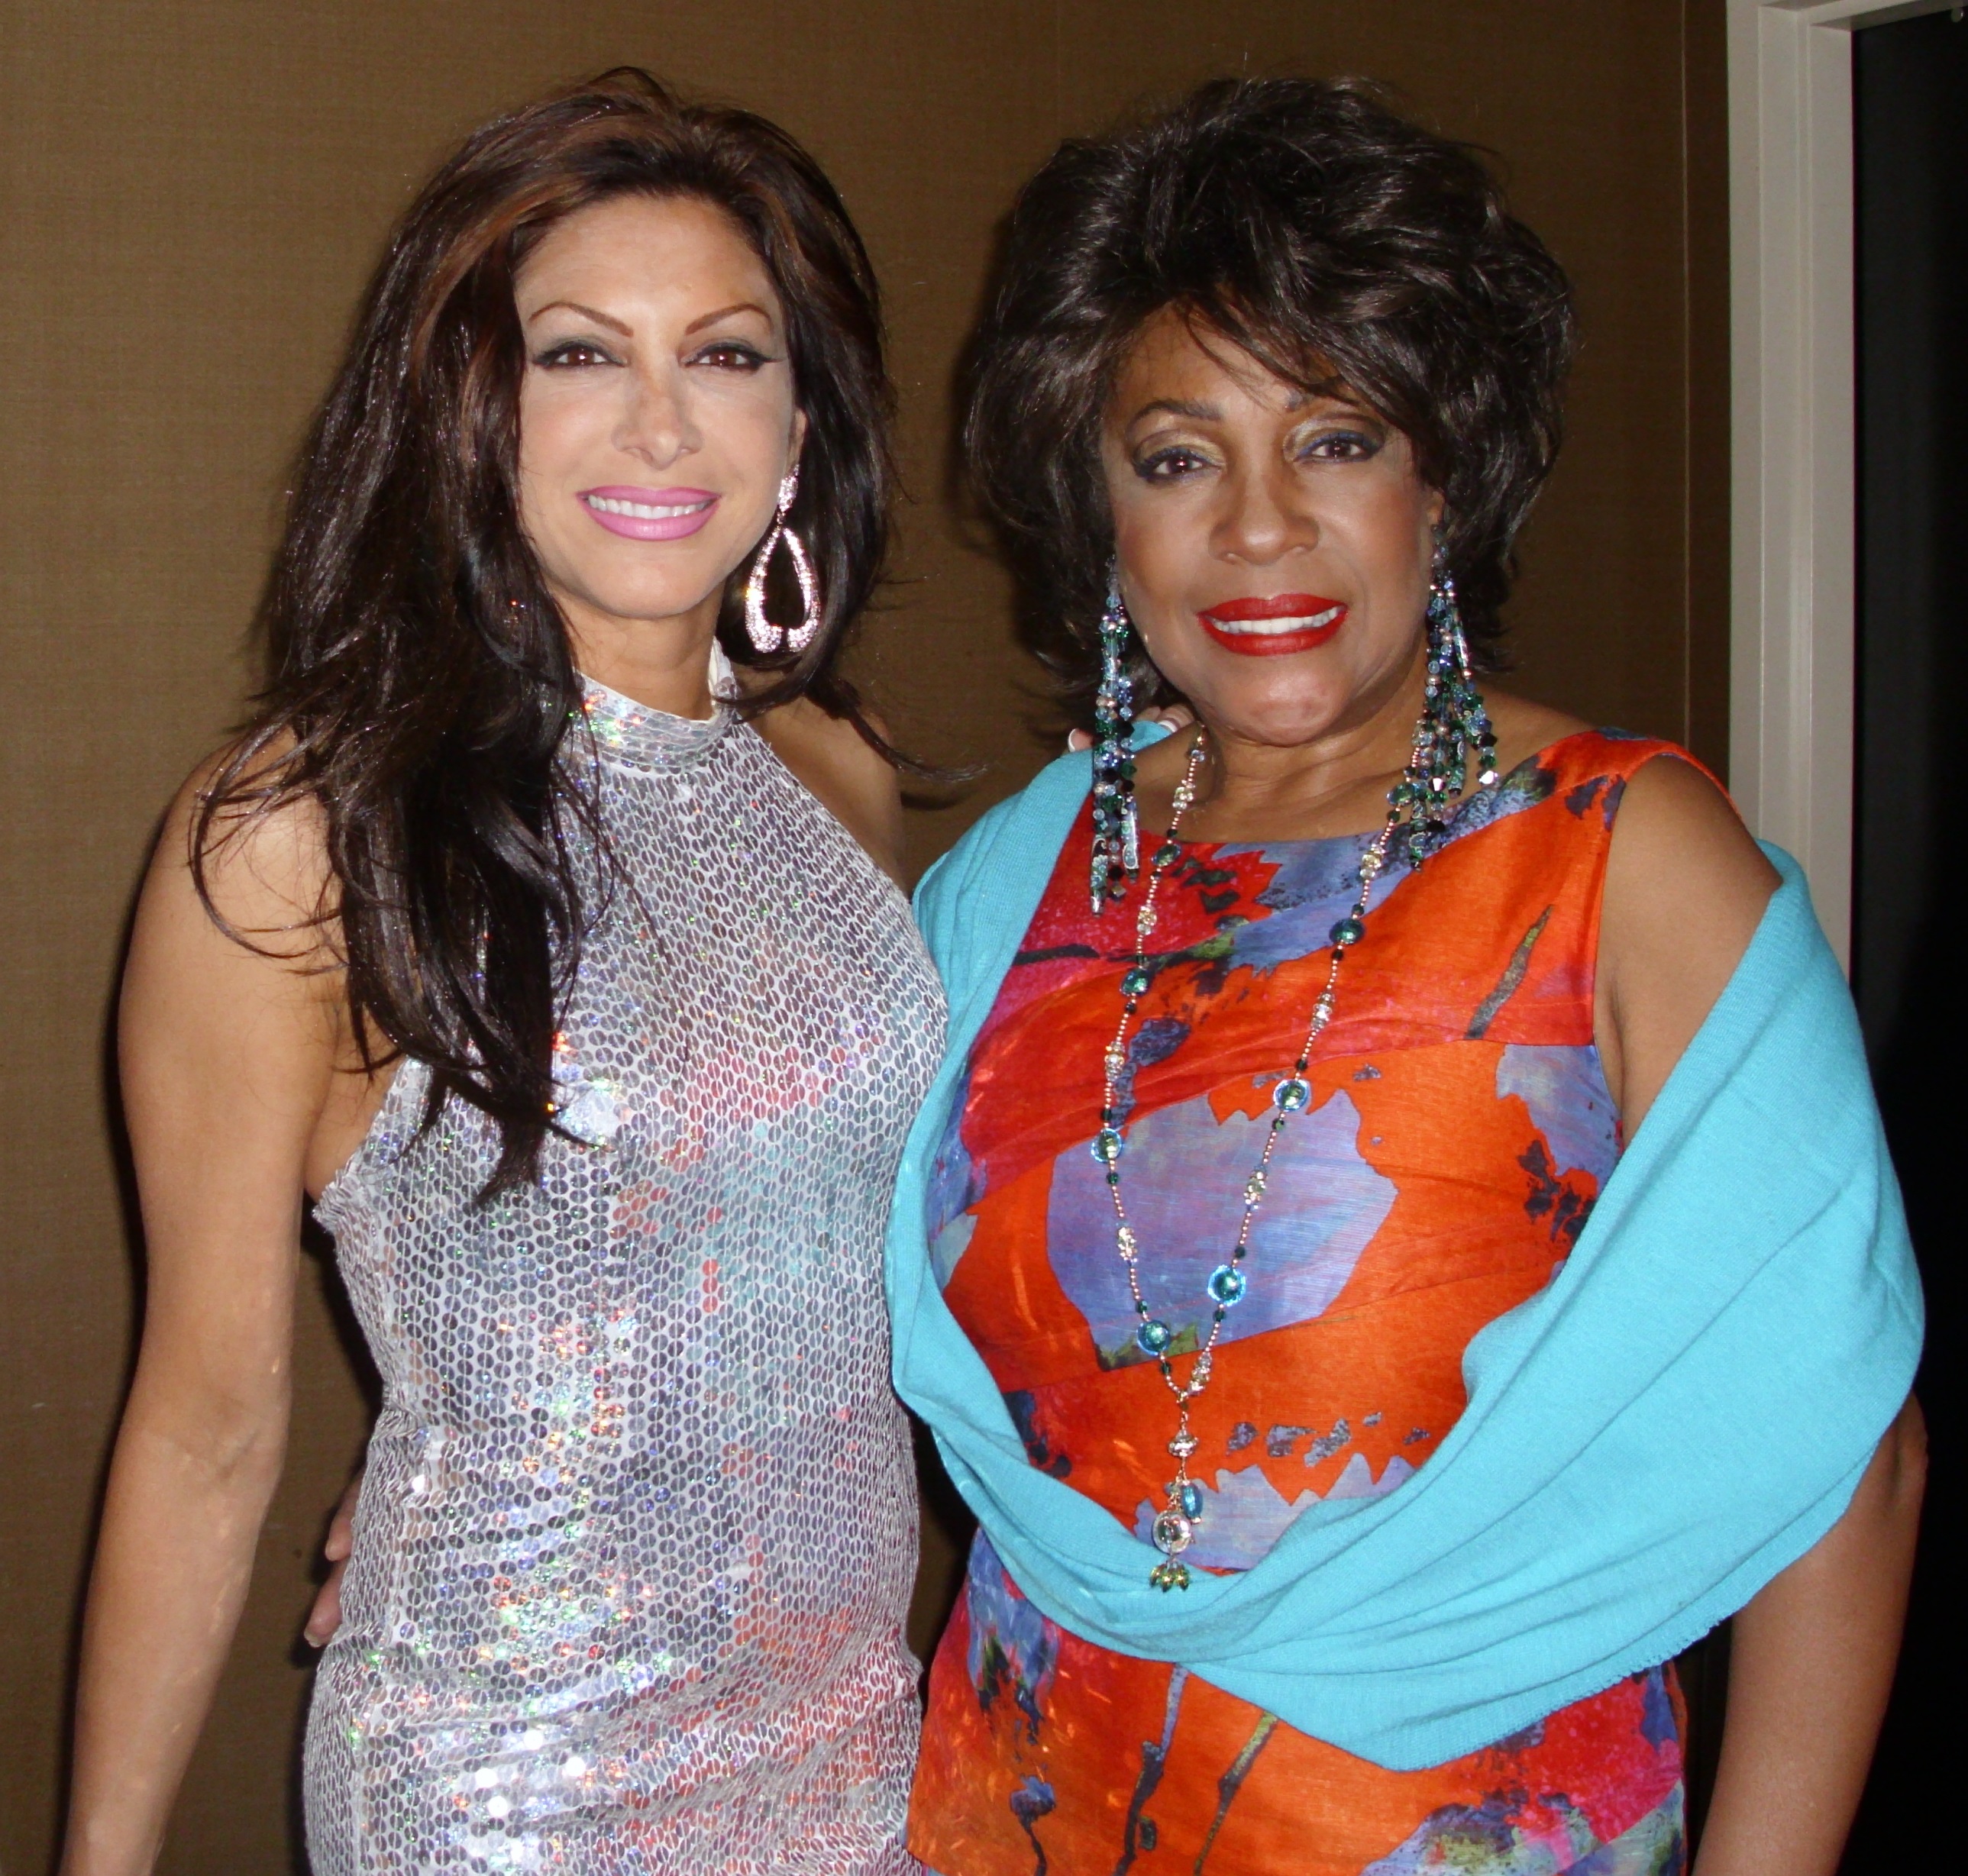 Backstage sharing dressing rooms with Supremes with Mary Wilson on the Dennis Bono Radio Show 2012